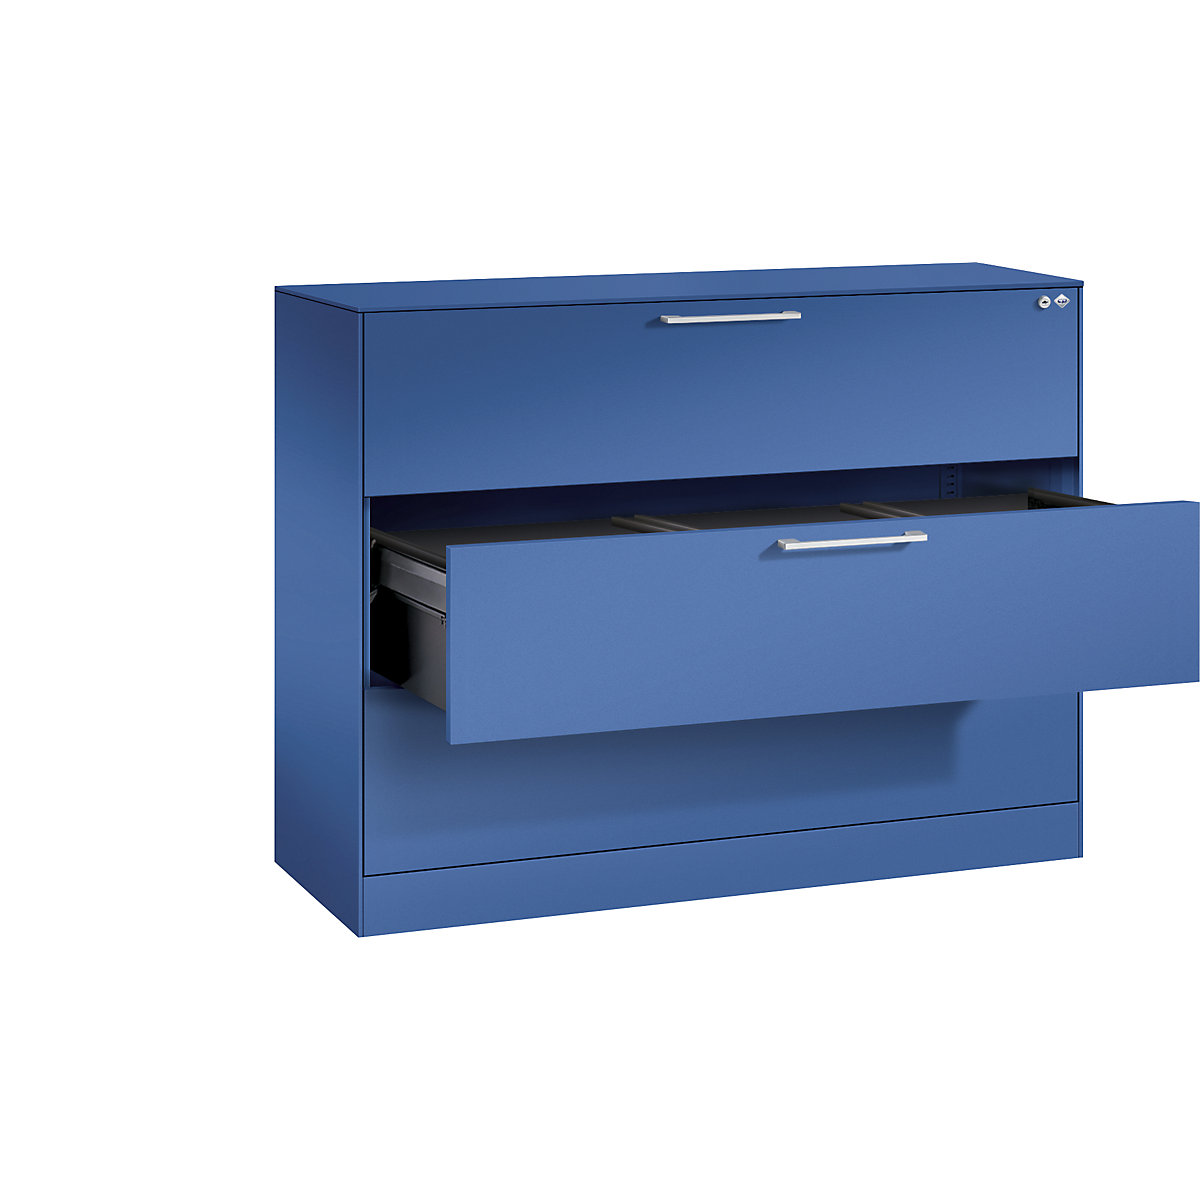 ASISTO suspension filing cabinet – C+P, width 1200 mm, with 3 drawers, gentian blue/gentian blue-18